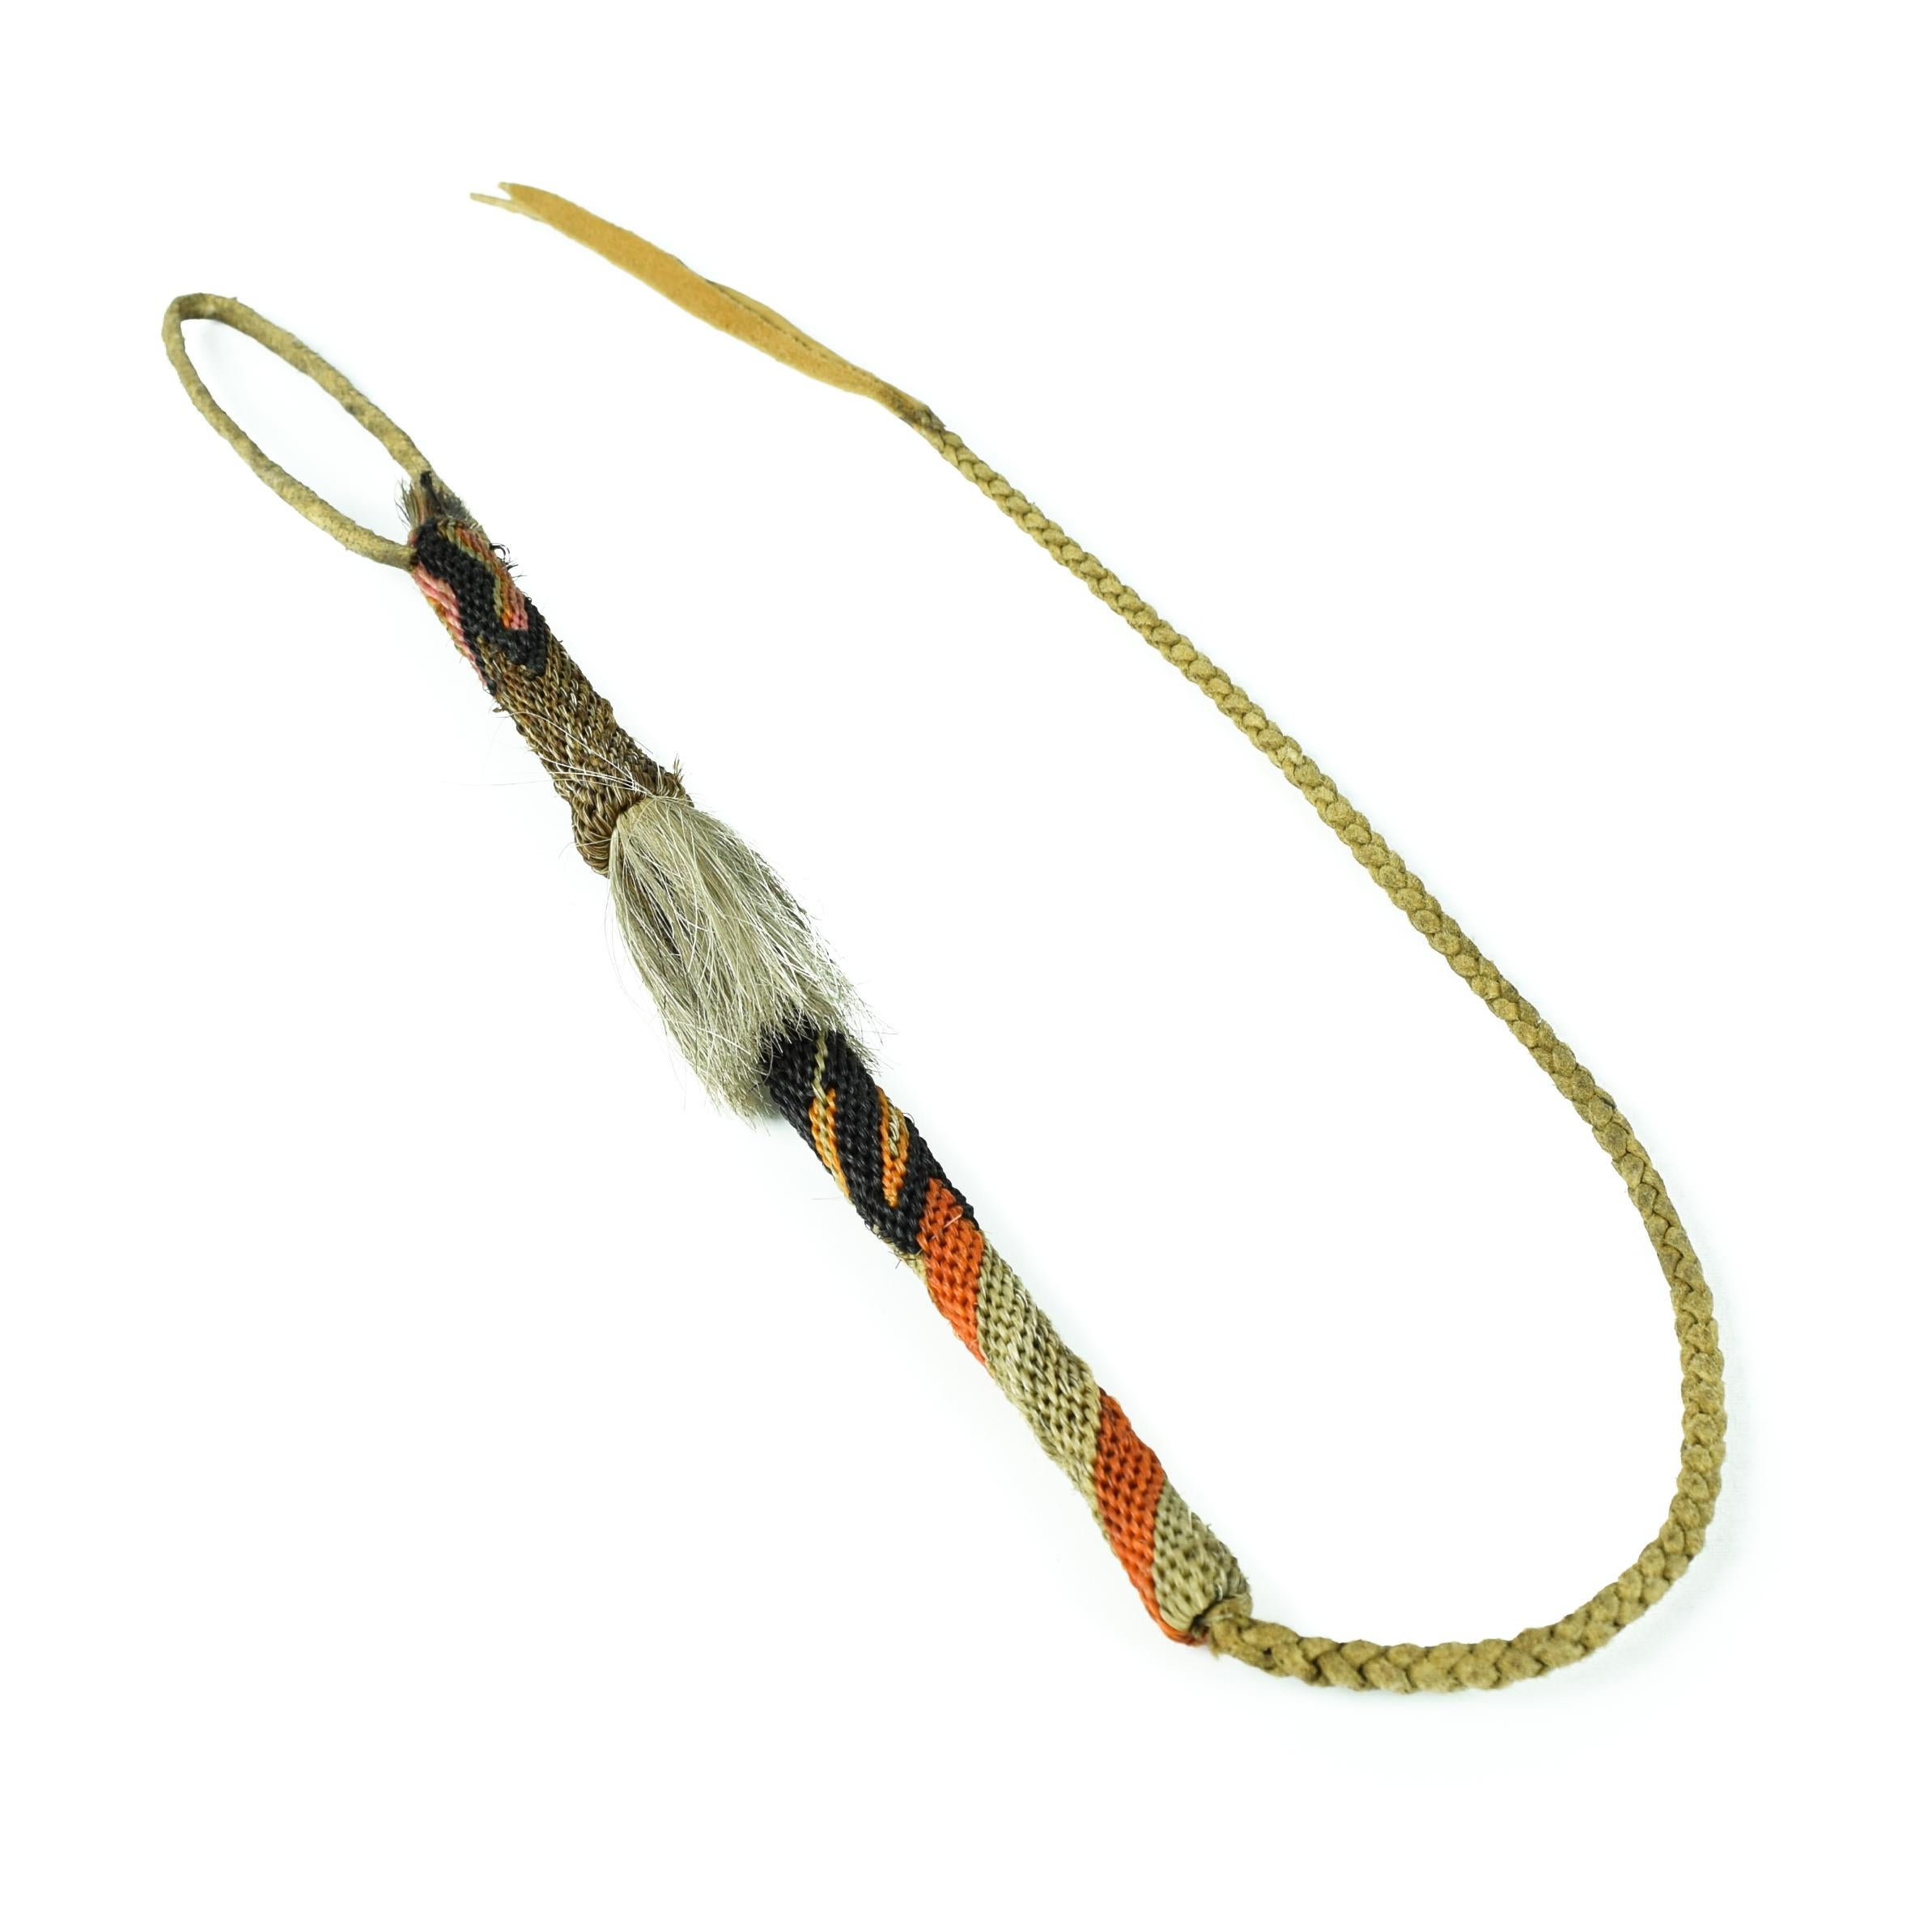 Deer Lodge Prison quirt with orange, black, and white dyed horsehair and leather hand strap and finely braided flapper. 
PERIOD: Early 20th Century
ORIGIN: Montana, United States
SIZE: Quirt: 12